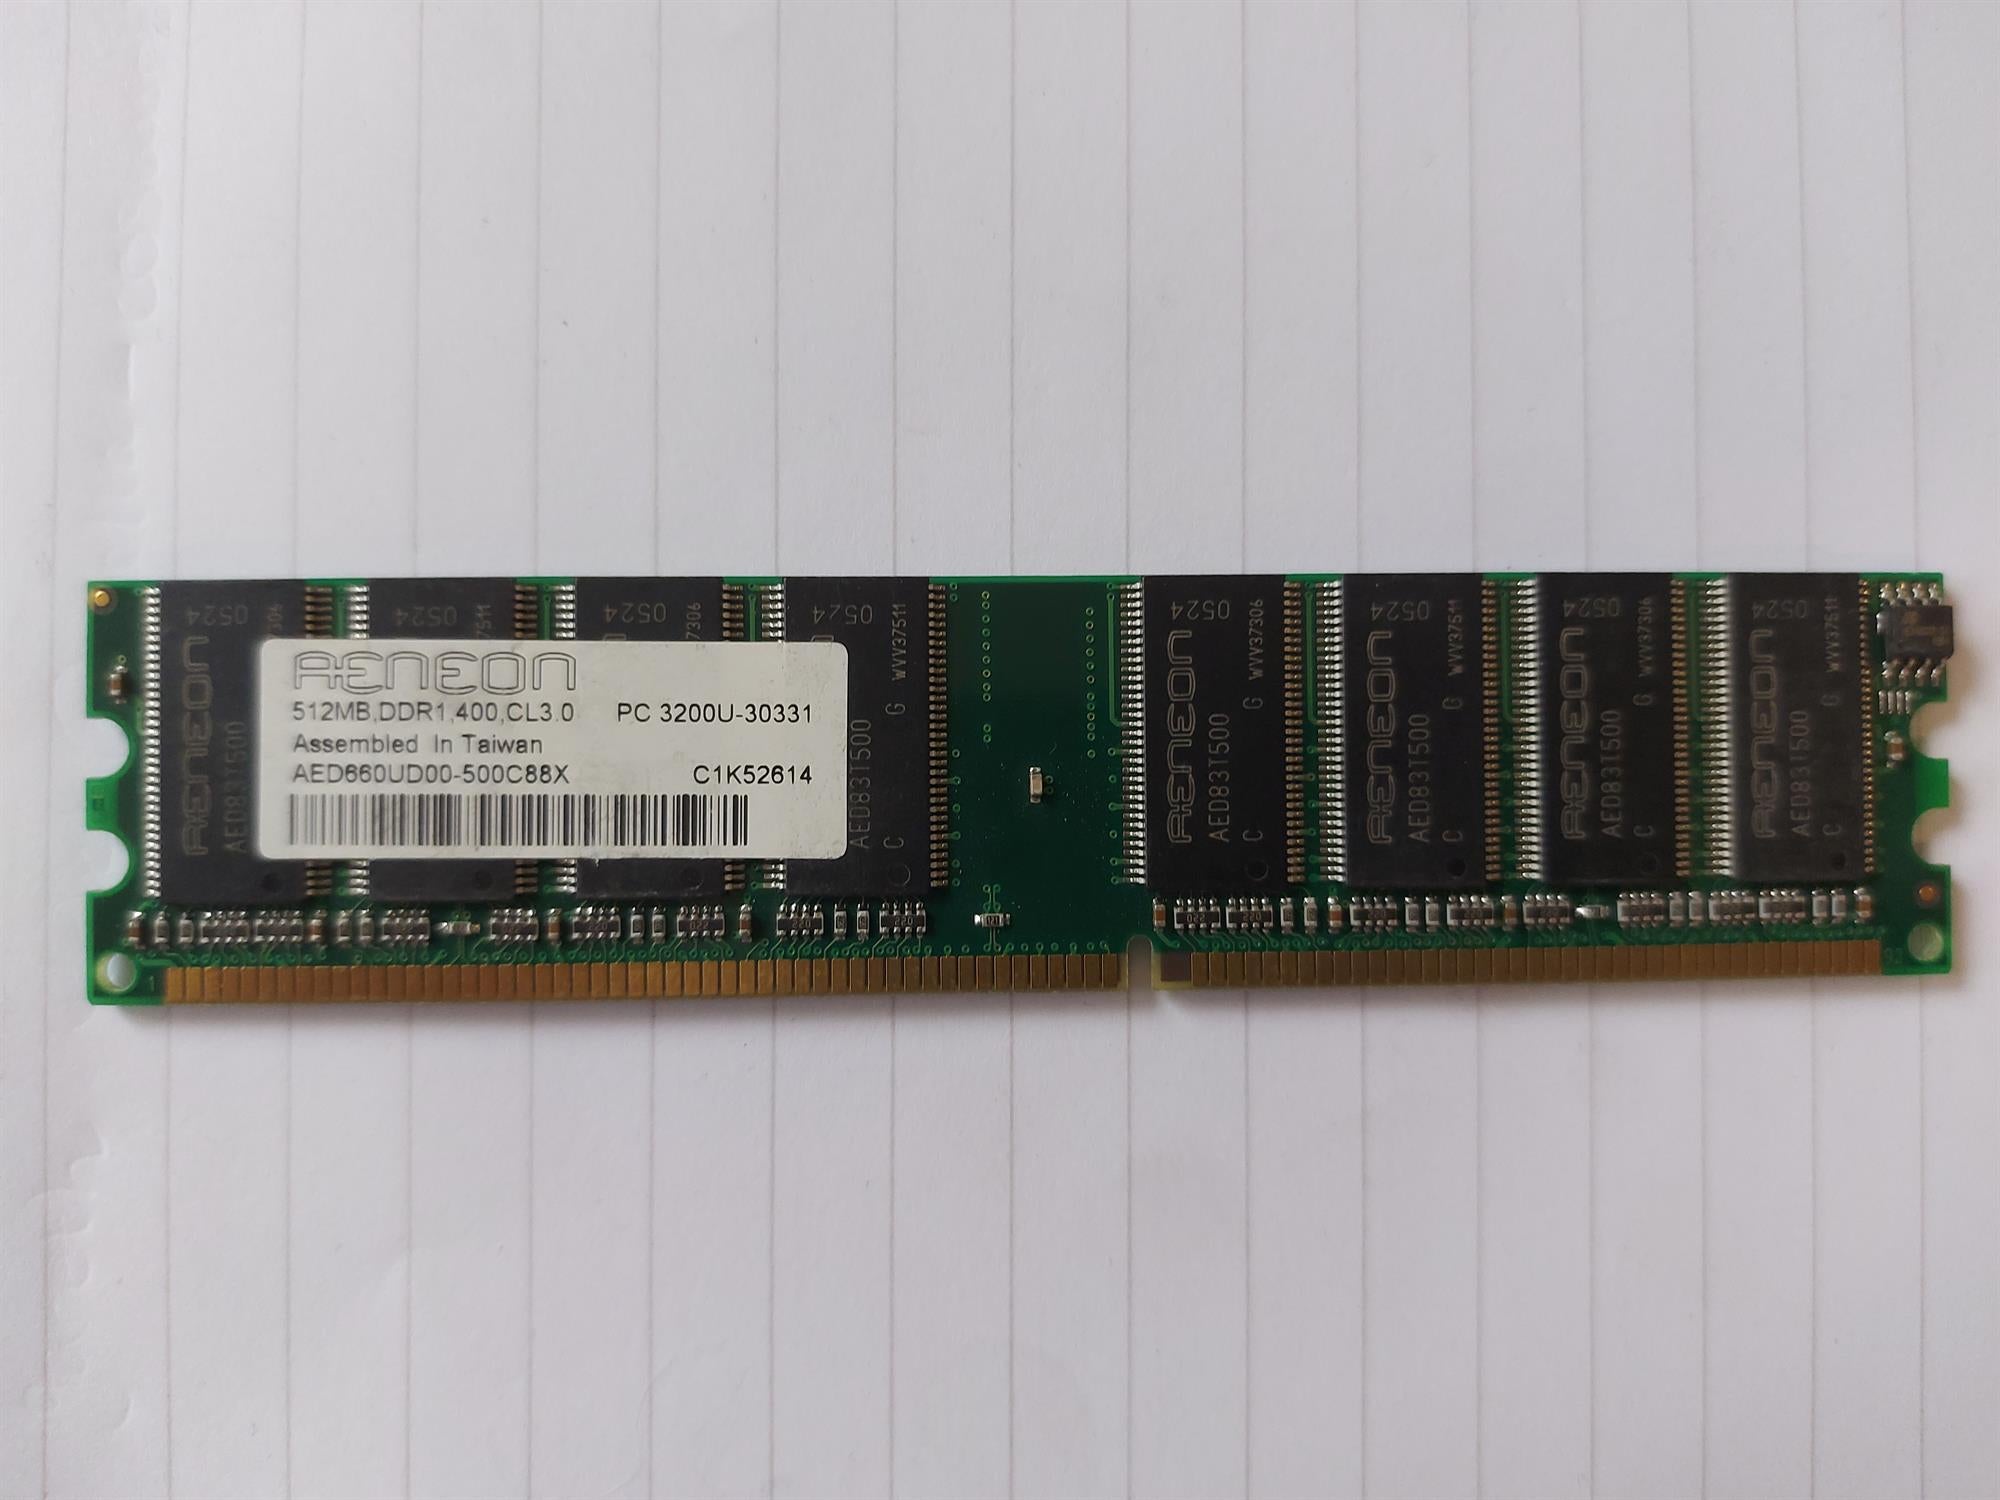 Aeneon 512MB PC3200 DDR-400MHz non-ECC Unbuffered CL3 184-Pin DIMM Memory Module ( AED660UD00-500C88X )